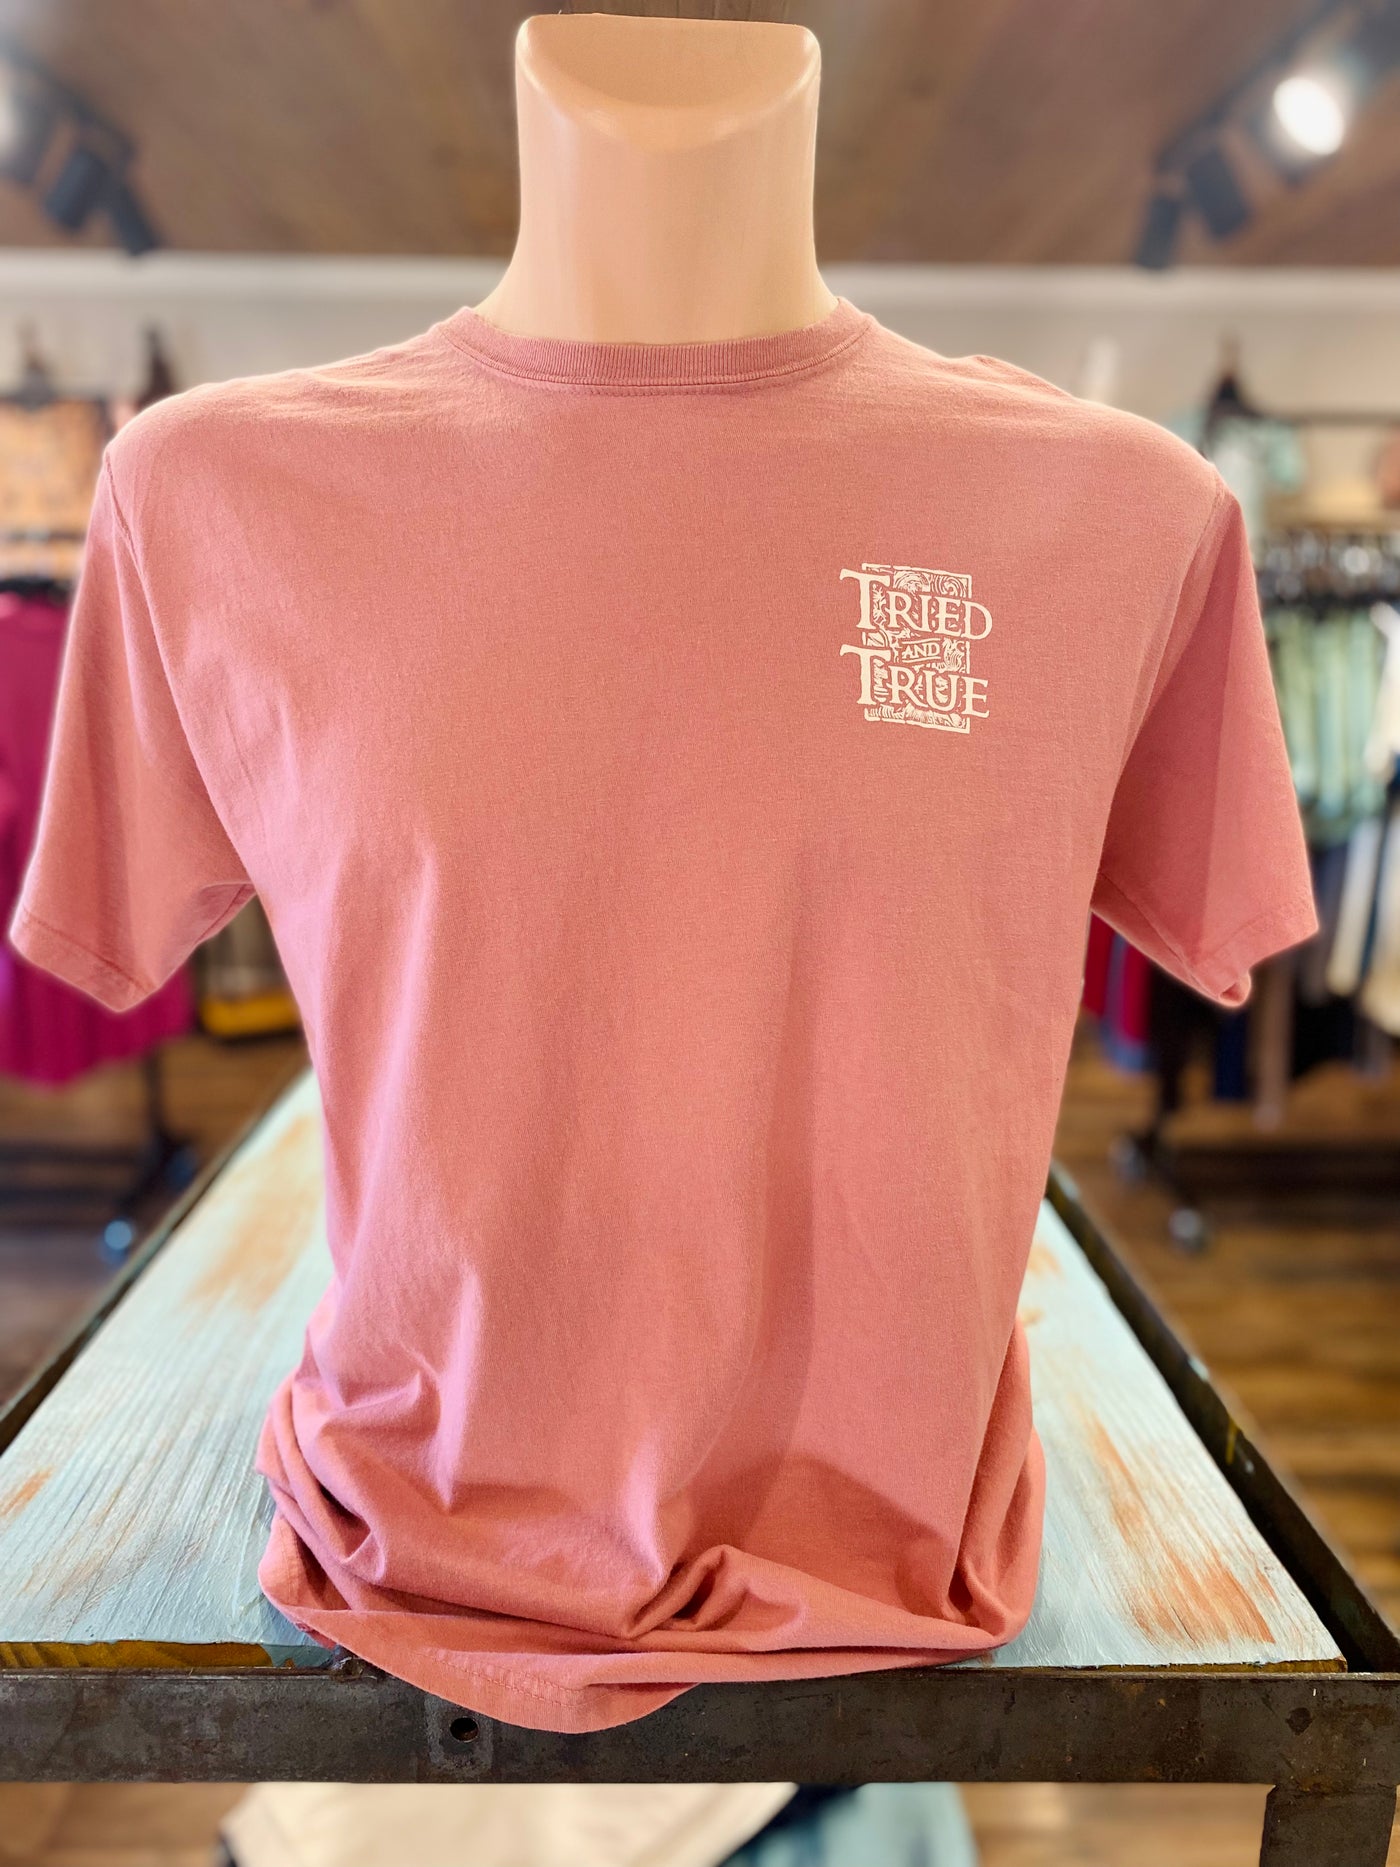 Tried and True "Farm Tools" Tee in Mauve Final Sale